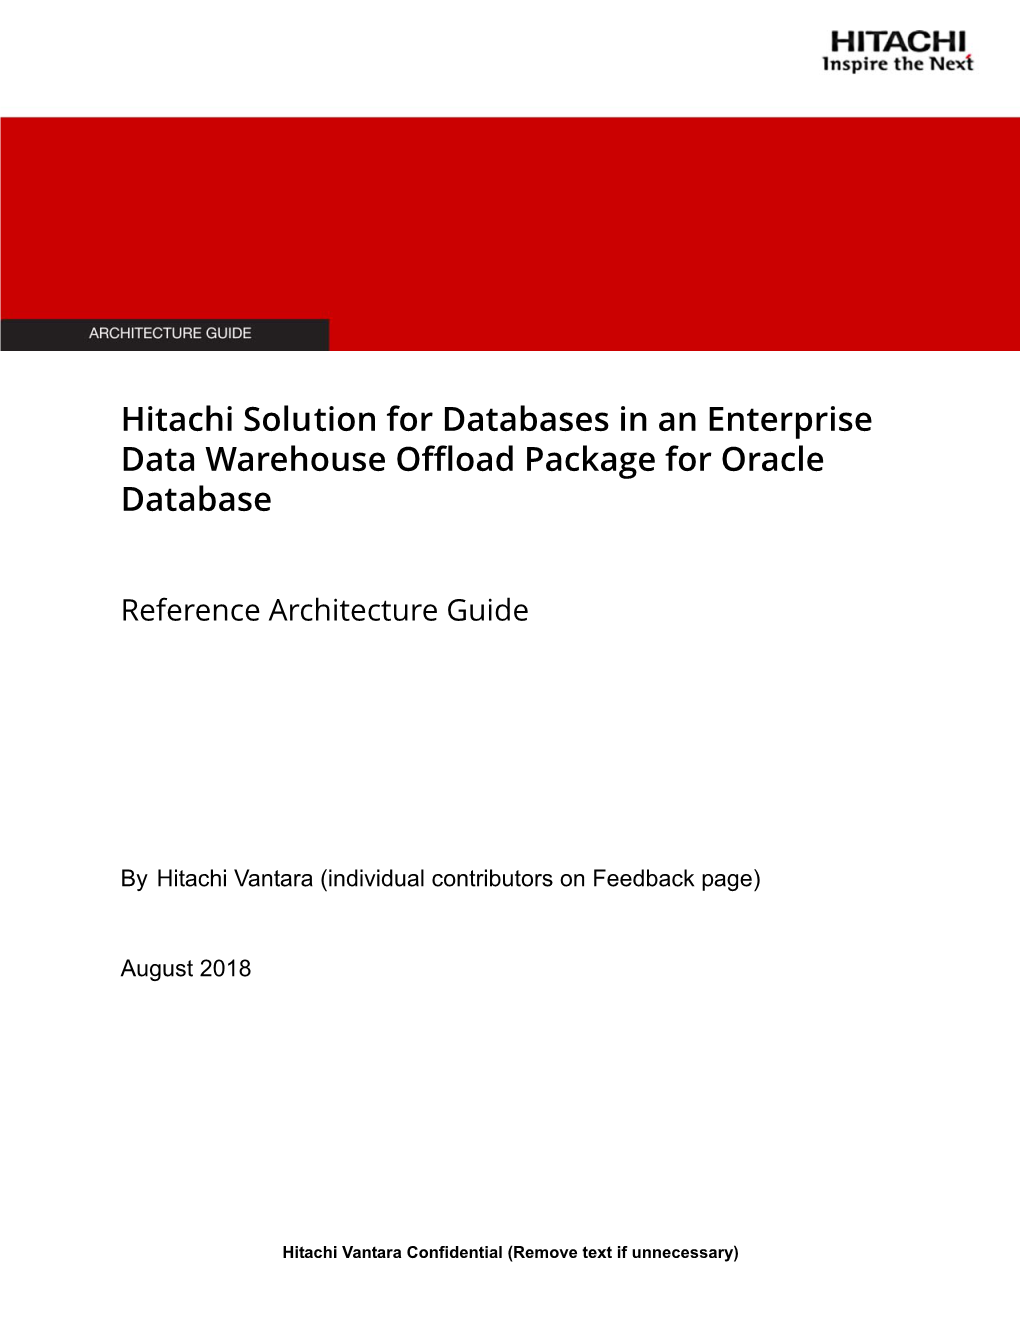 Hitachi Solution for Databases in an Enterprise Data Warehouse Offload Package for Oracle Database